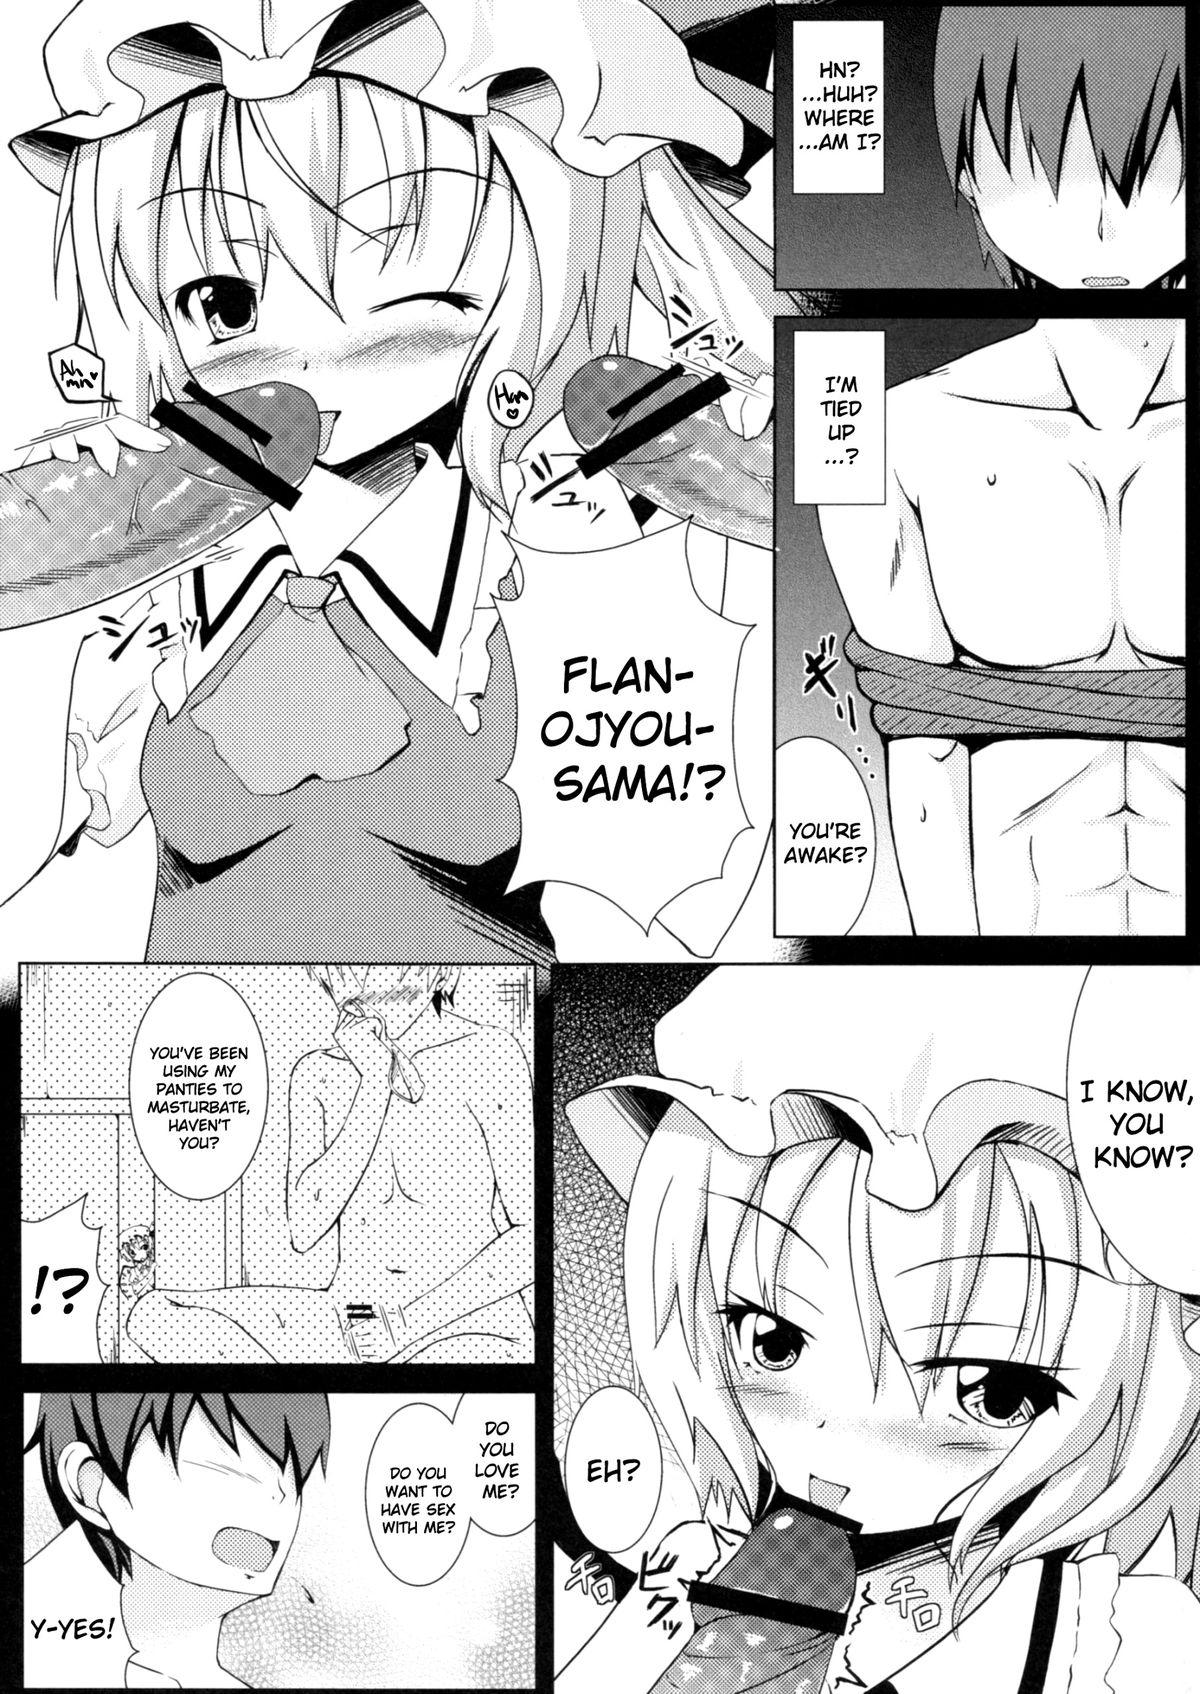 Oil NTR Flan-chan - Touhou project Gay Military - Page 2